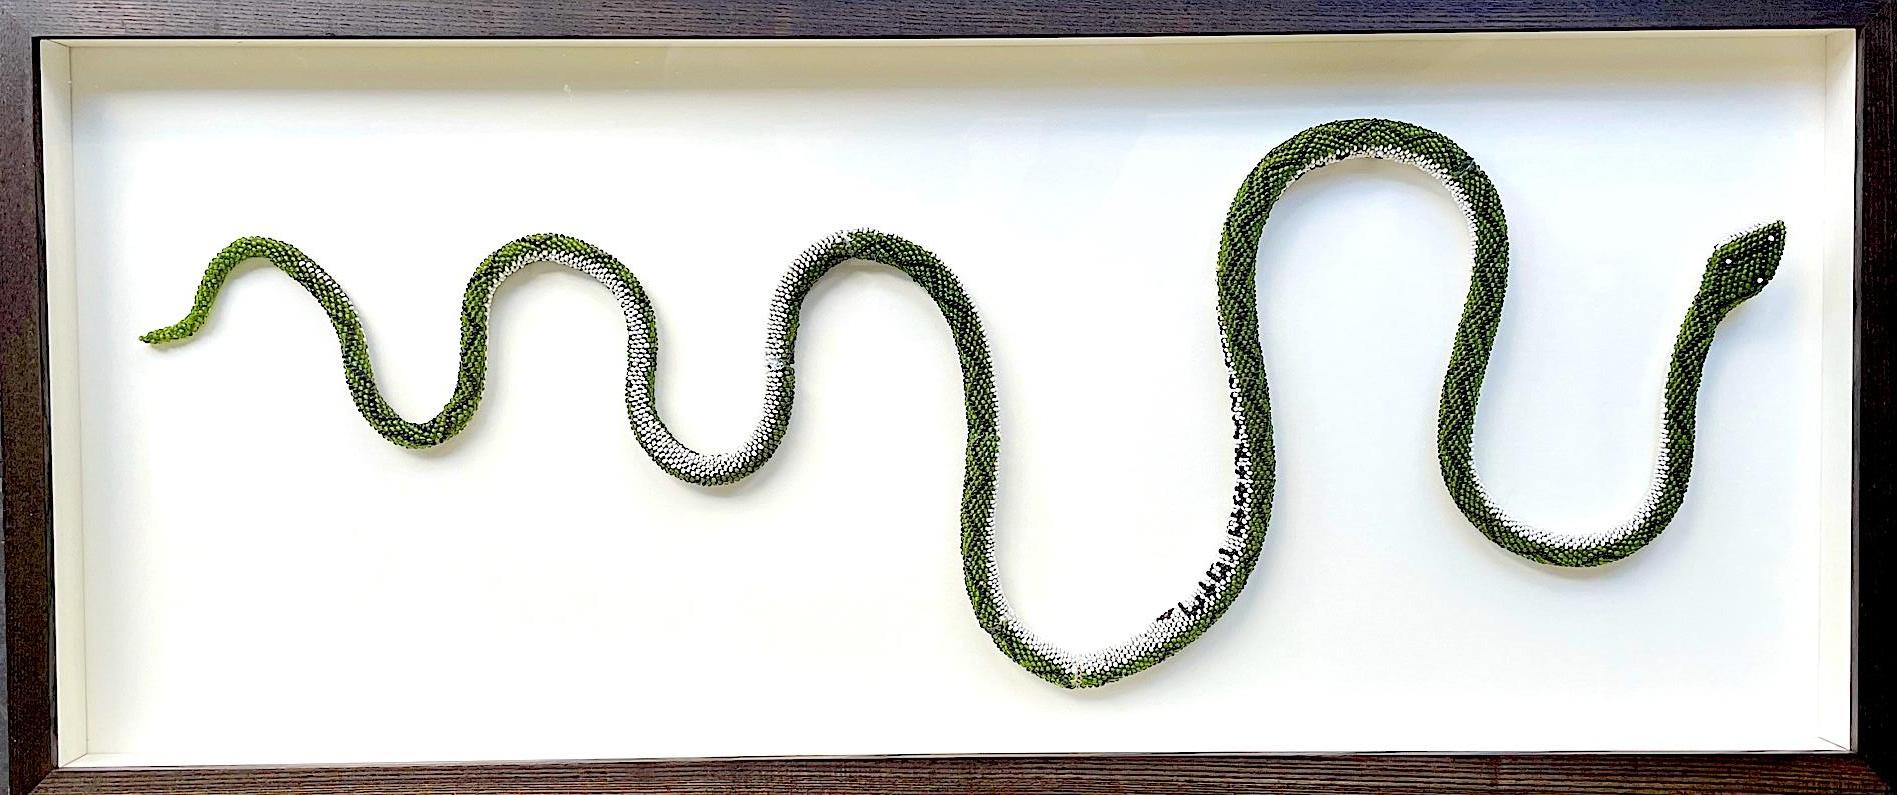 A stunning large green, white and black beaded snake with intricate zig zag snake markings along the back, made by WW1 Turkish prisoners of war with black beads spelling out 